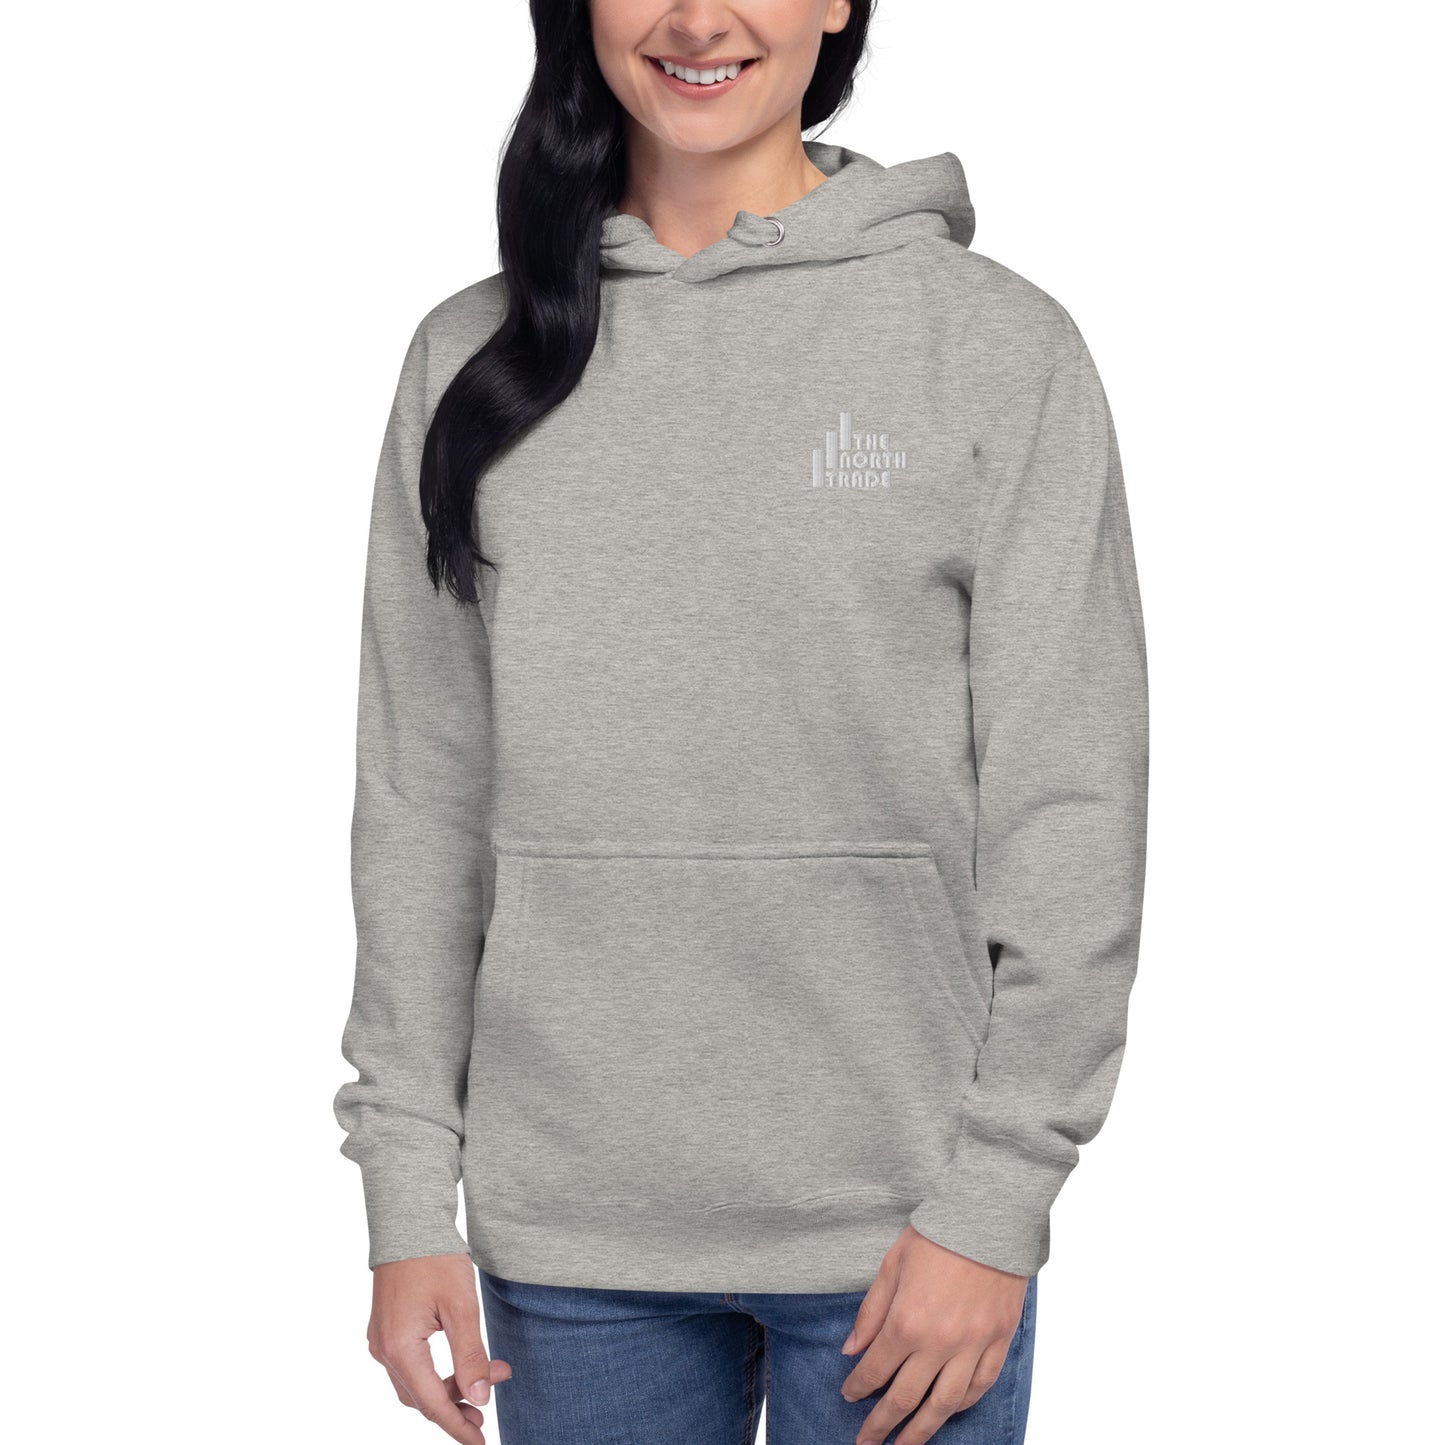 The North Trade Women's Cotton Heritage Hoodie